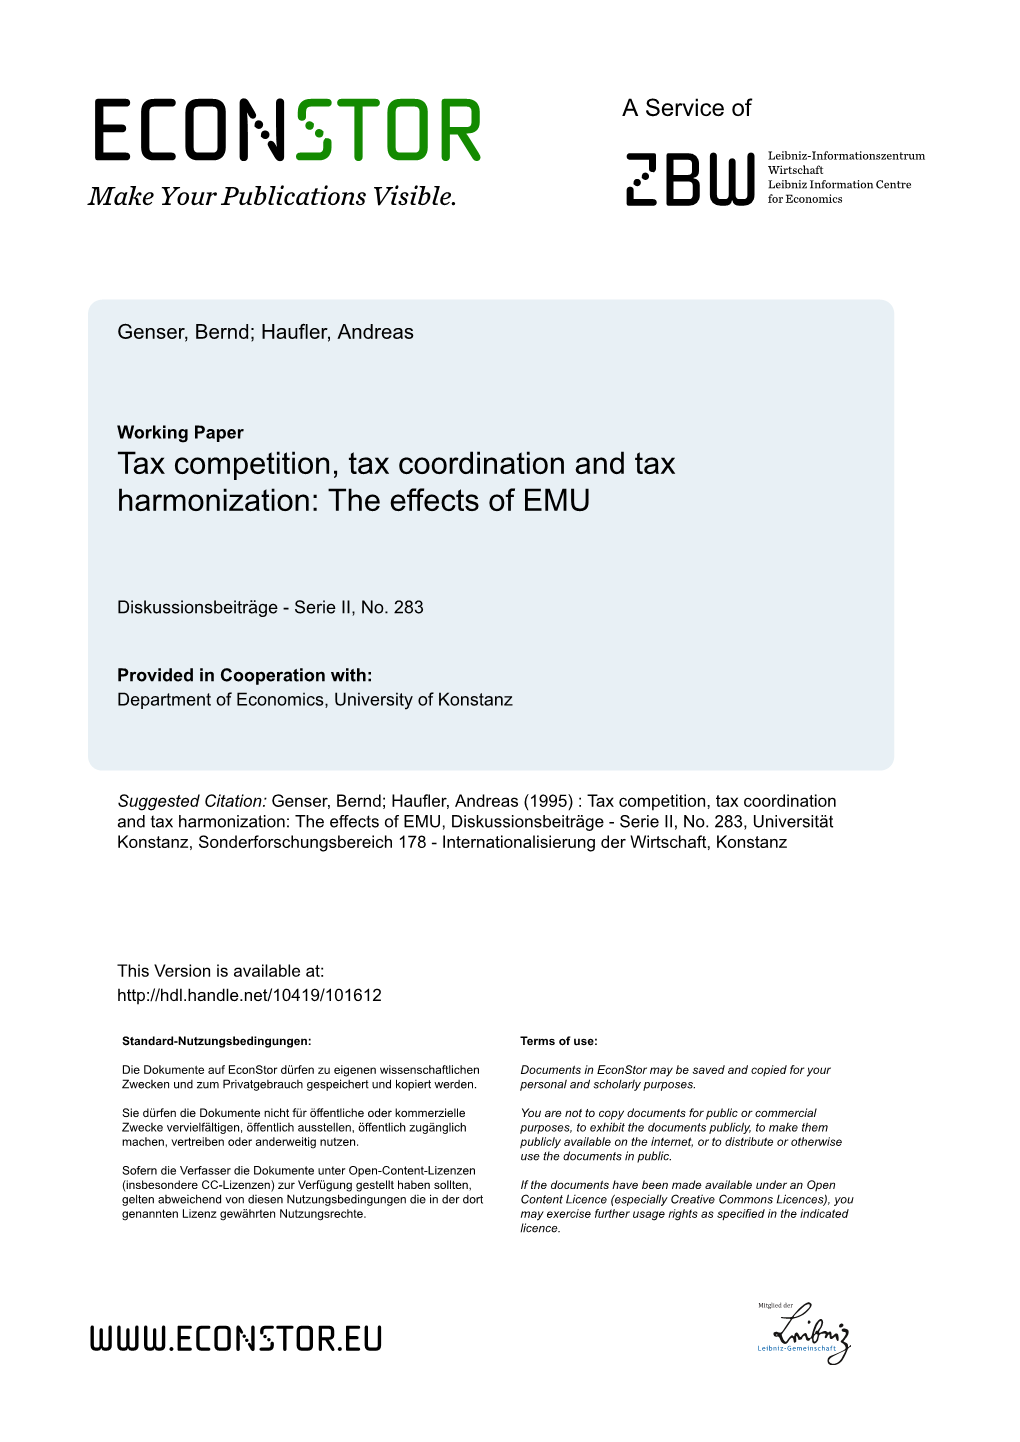 Tax Competition, Tax Coordination and Tax Harmonization: the Effects of EMU